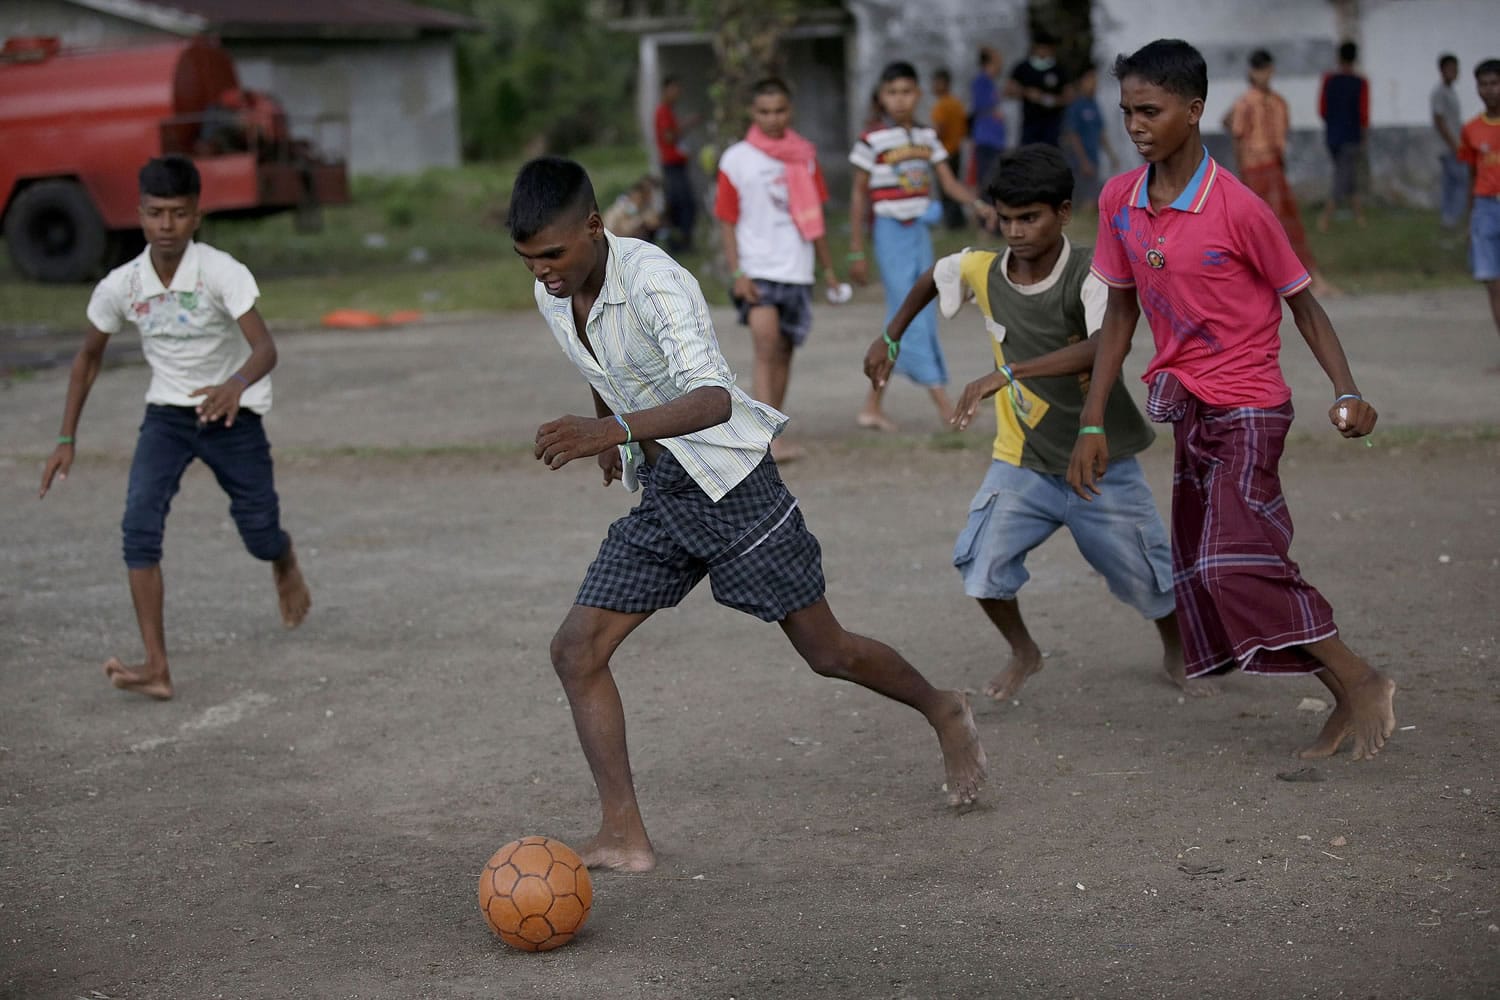 Ethnic Rohingya men play soccer Friday at their temporary shelter in Langsa, Aceh province, Indonesia. Thousands of refugees and migrants have washed ashore in Malaysia, Indonesia and Thailand, according to the International Organization for Migration. Half are Rohingya and the rest are from Bangladesh, the IOM said. The U.N. refugee agency estimates more than 3,000 others may still be at sea.